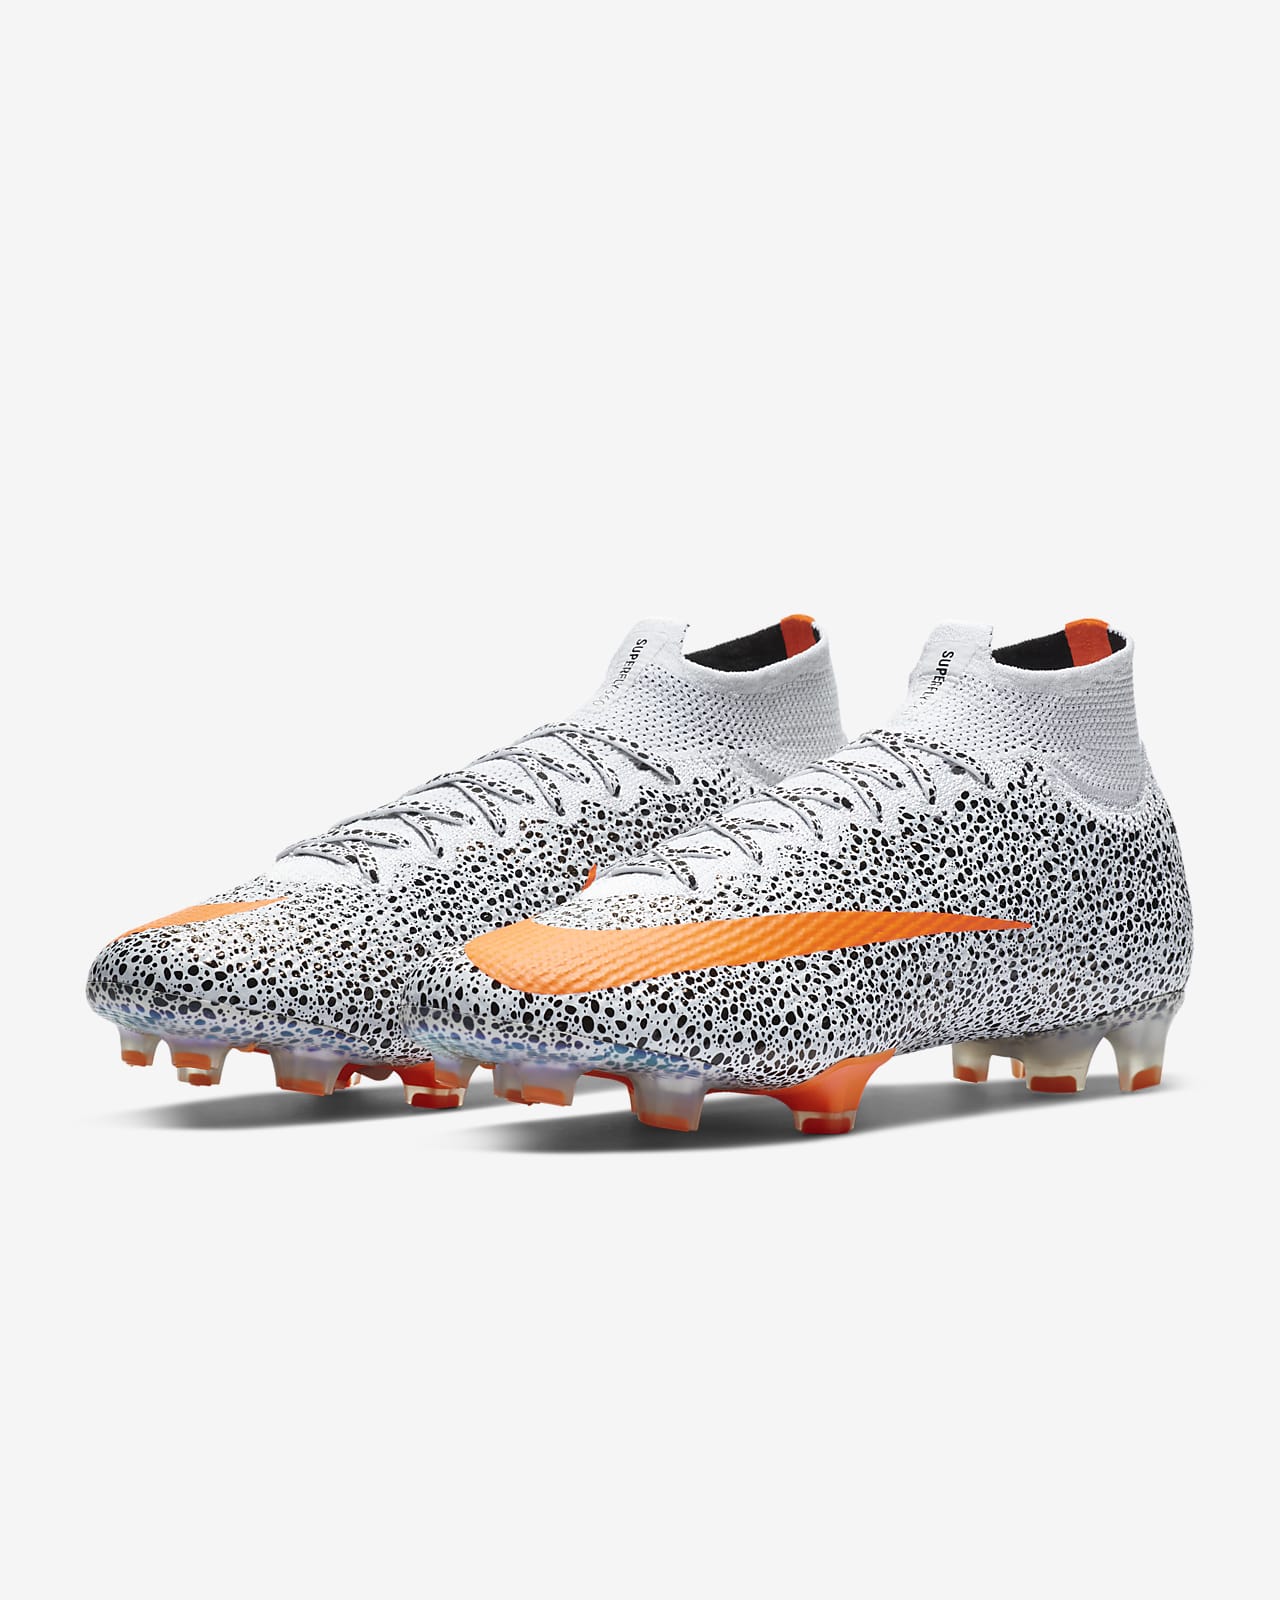 mercurial superfly soccer cleats